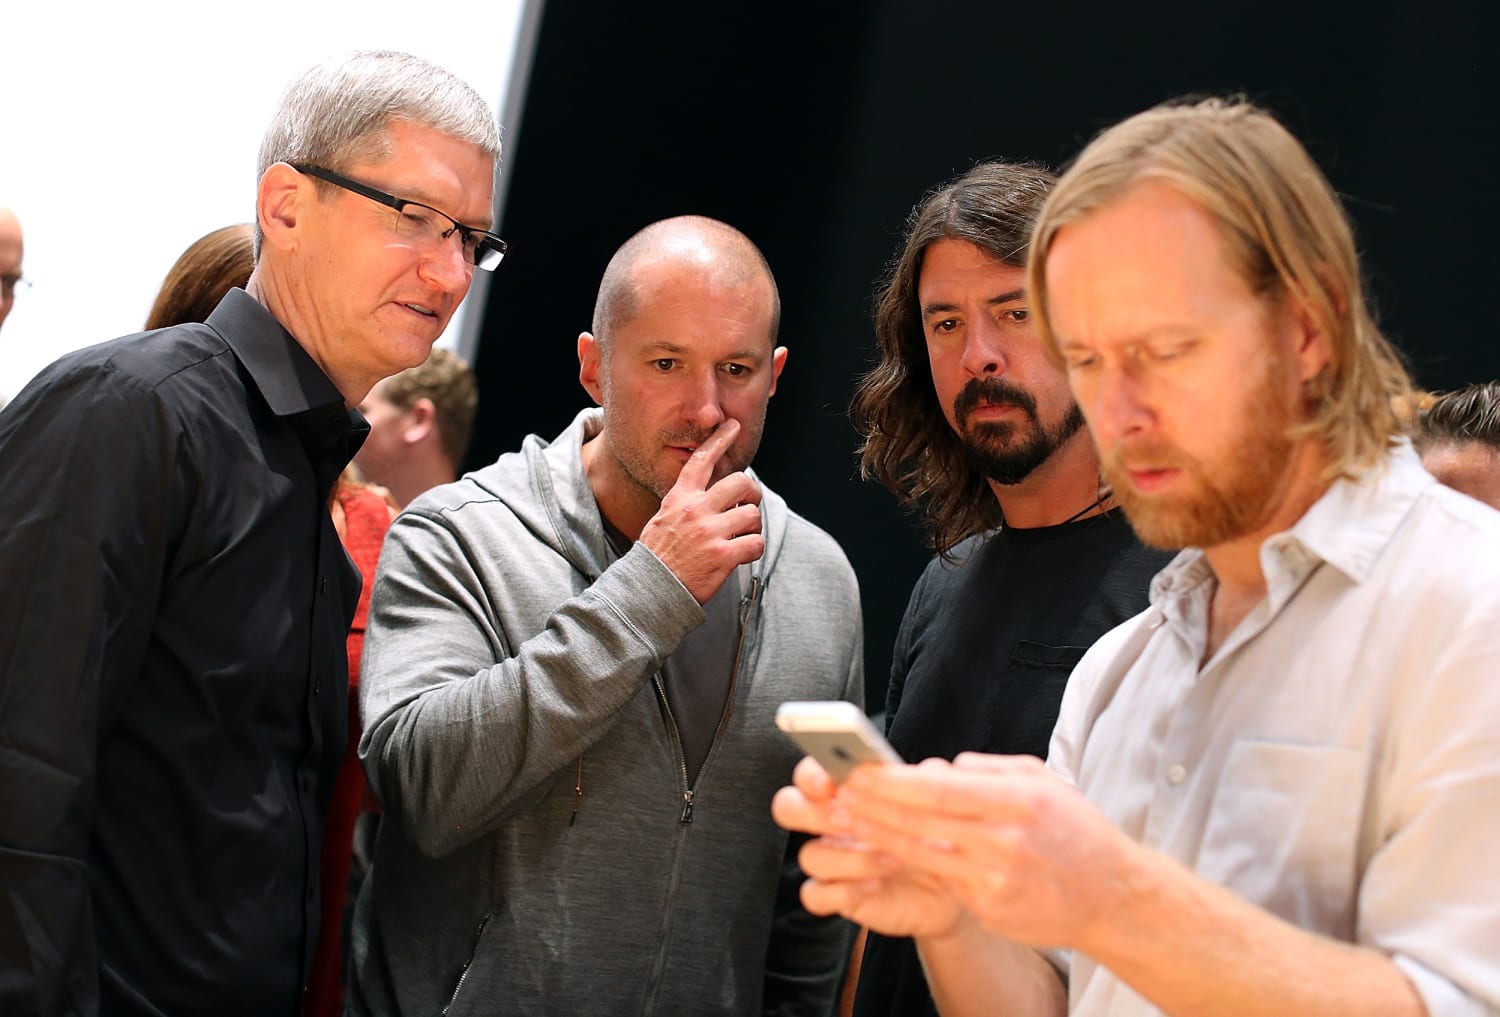 Video: Apple Inc.'s new design team, Ive and Newson, on Charlie